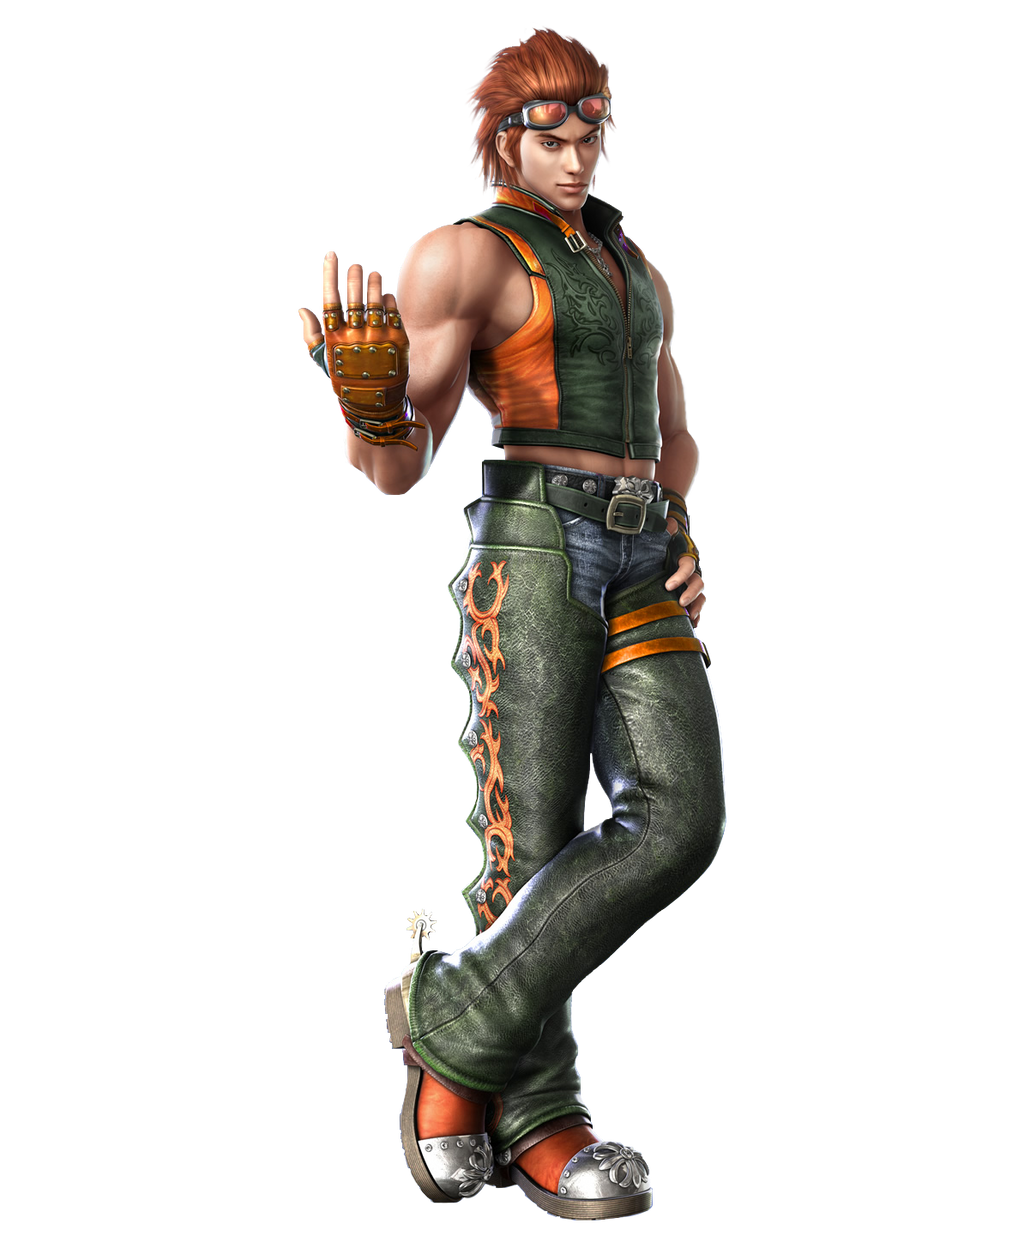 hwoarang_render_by_fabyleon-d8h0is8.png